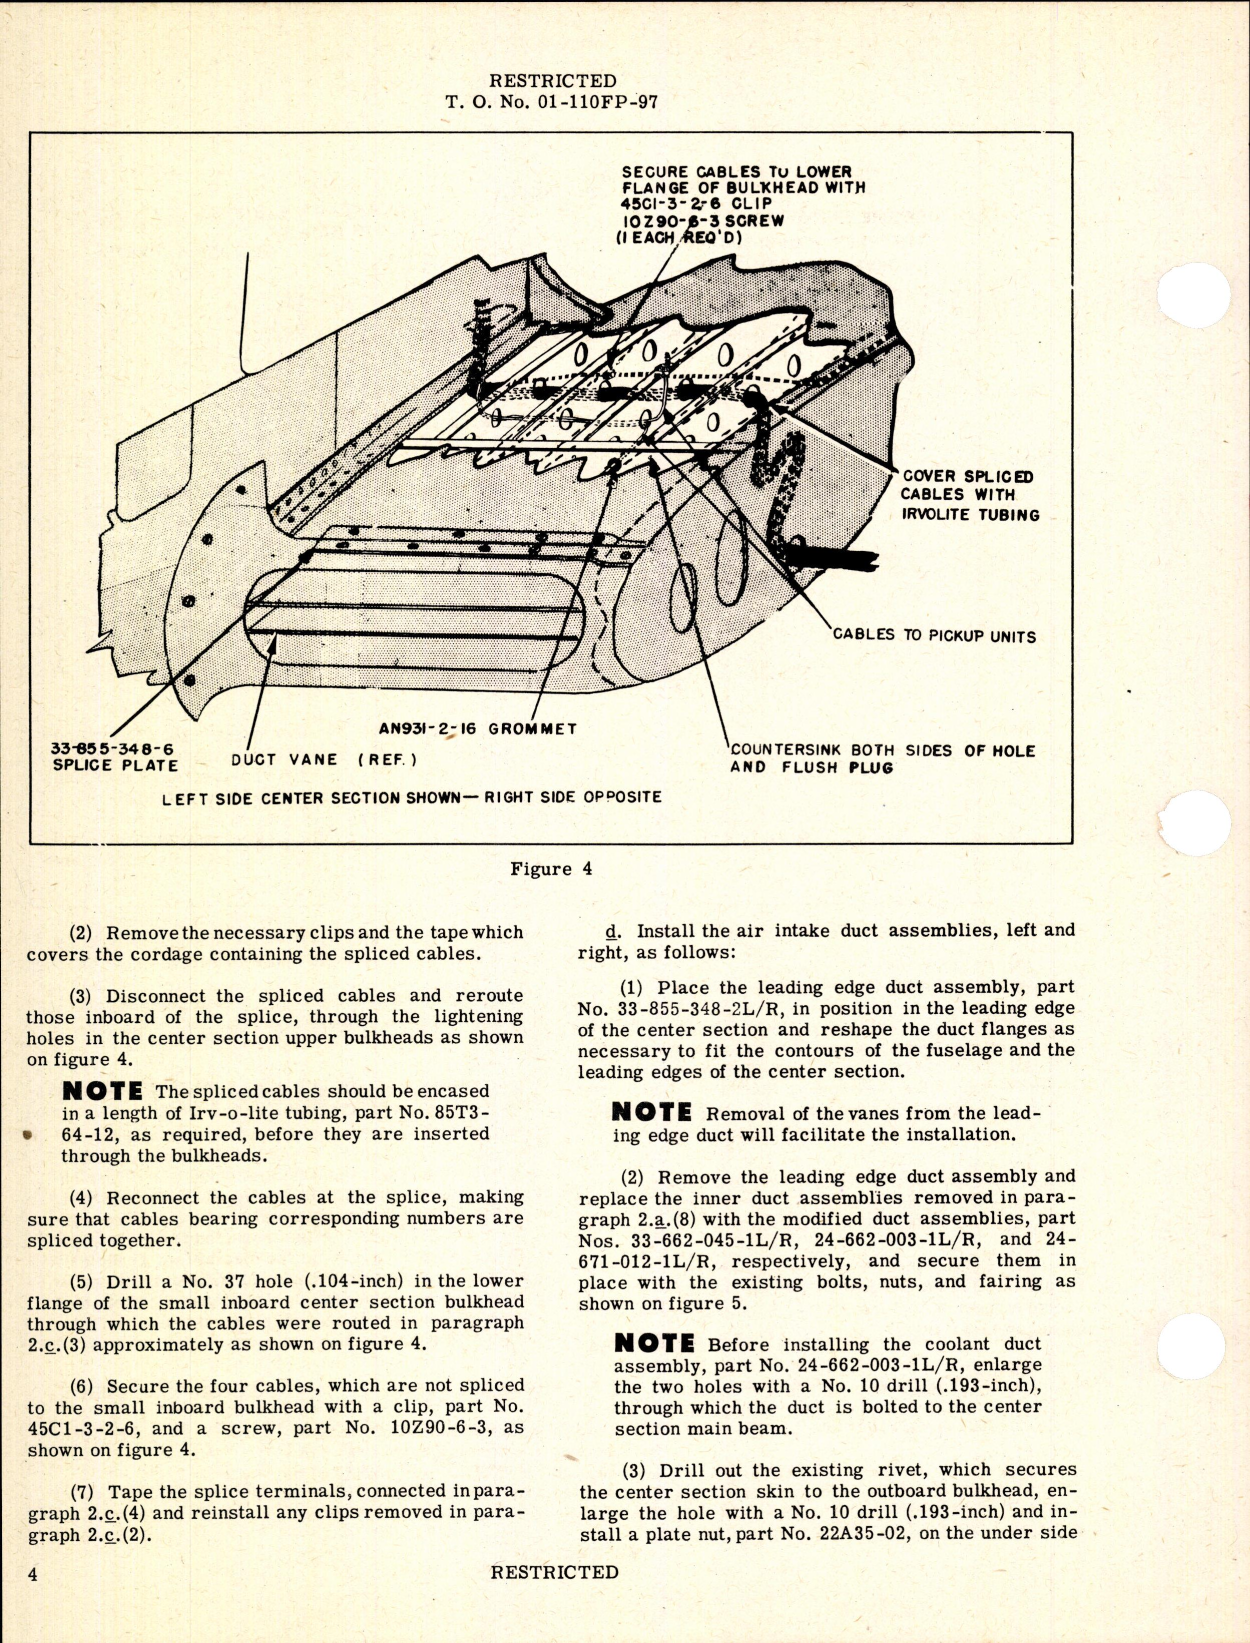 Sample page 4 from AirCorps Library document: Replacement of Oil and Coolant Radiator Air Intake Ducts